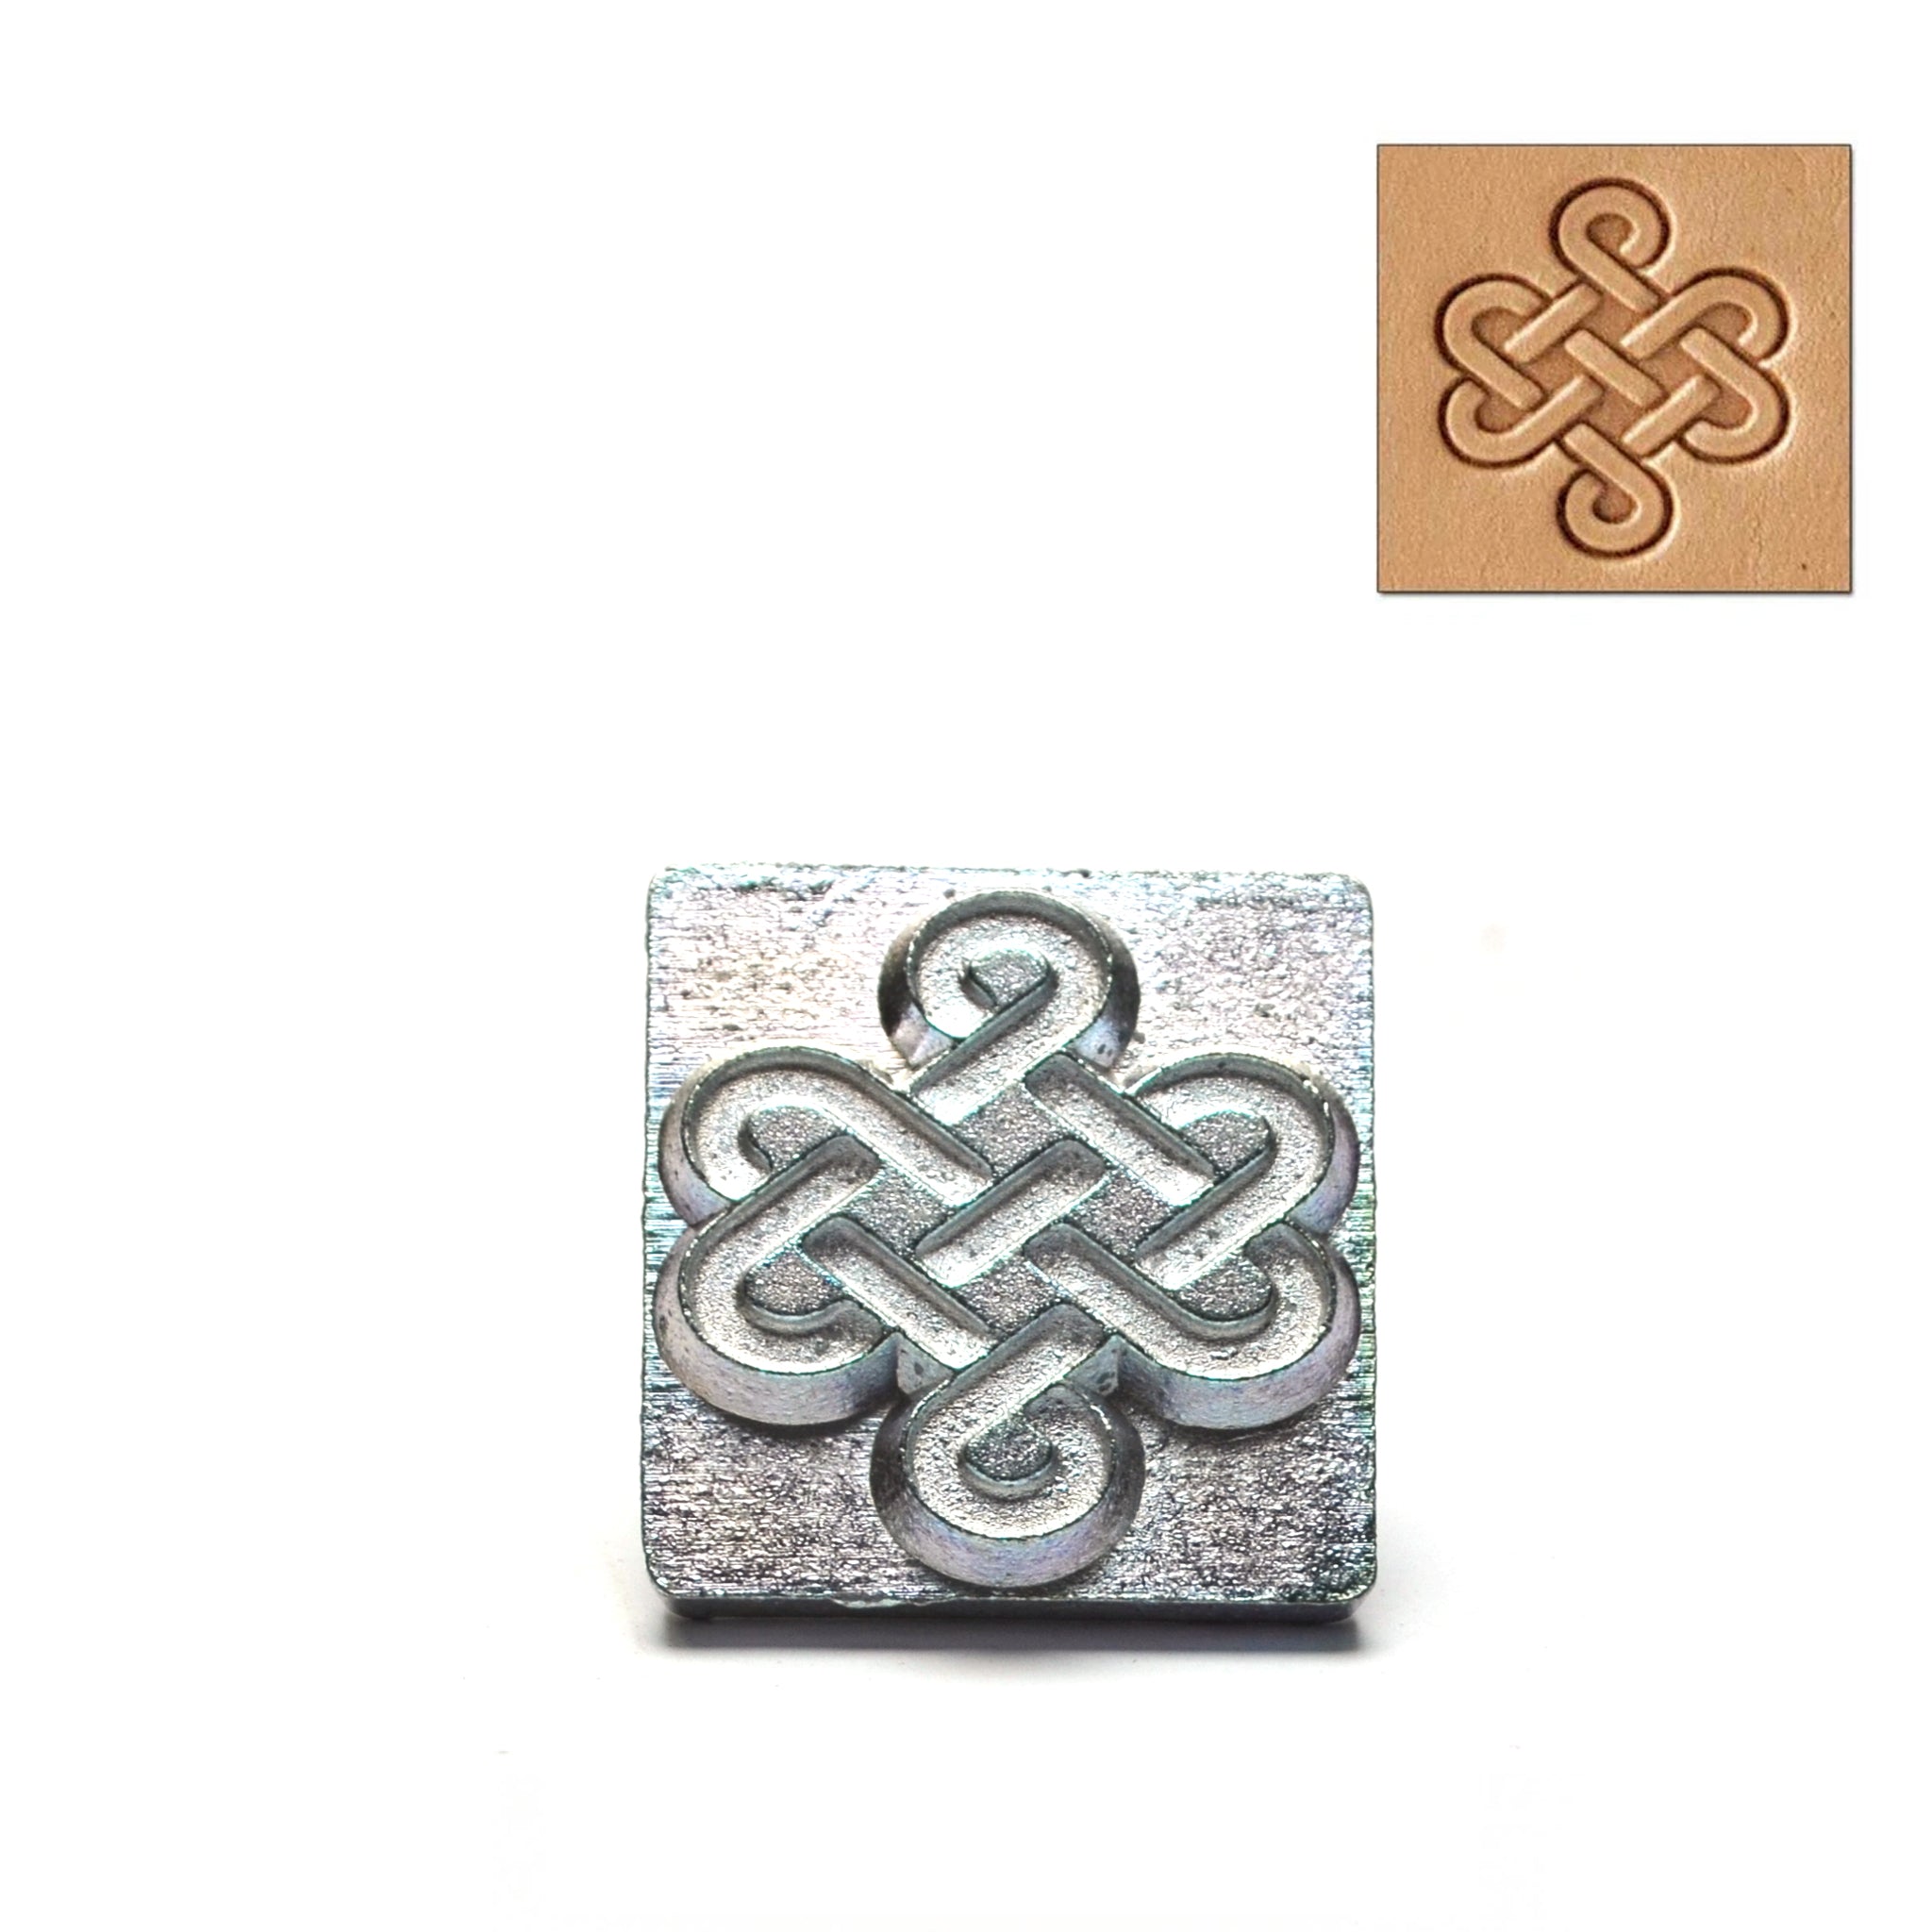 Celtic Dara Knot 3d embossing stamp from Identity Leathercraft